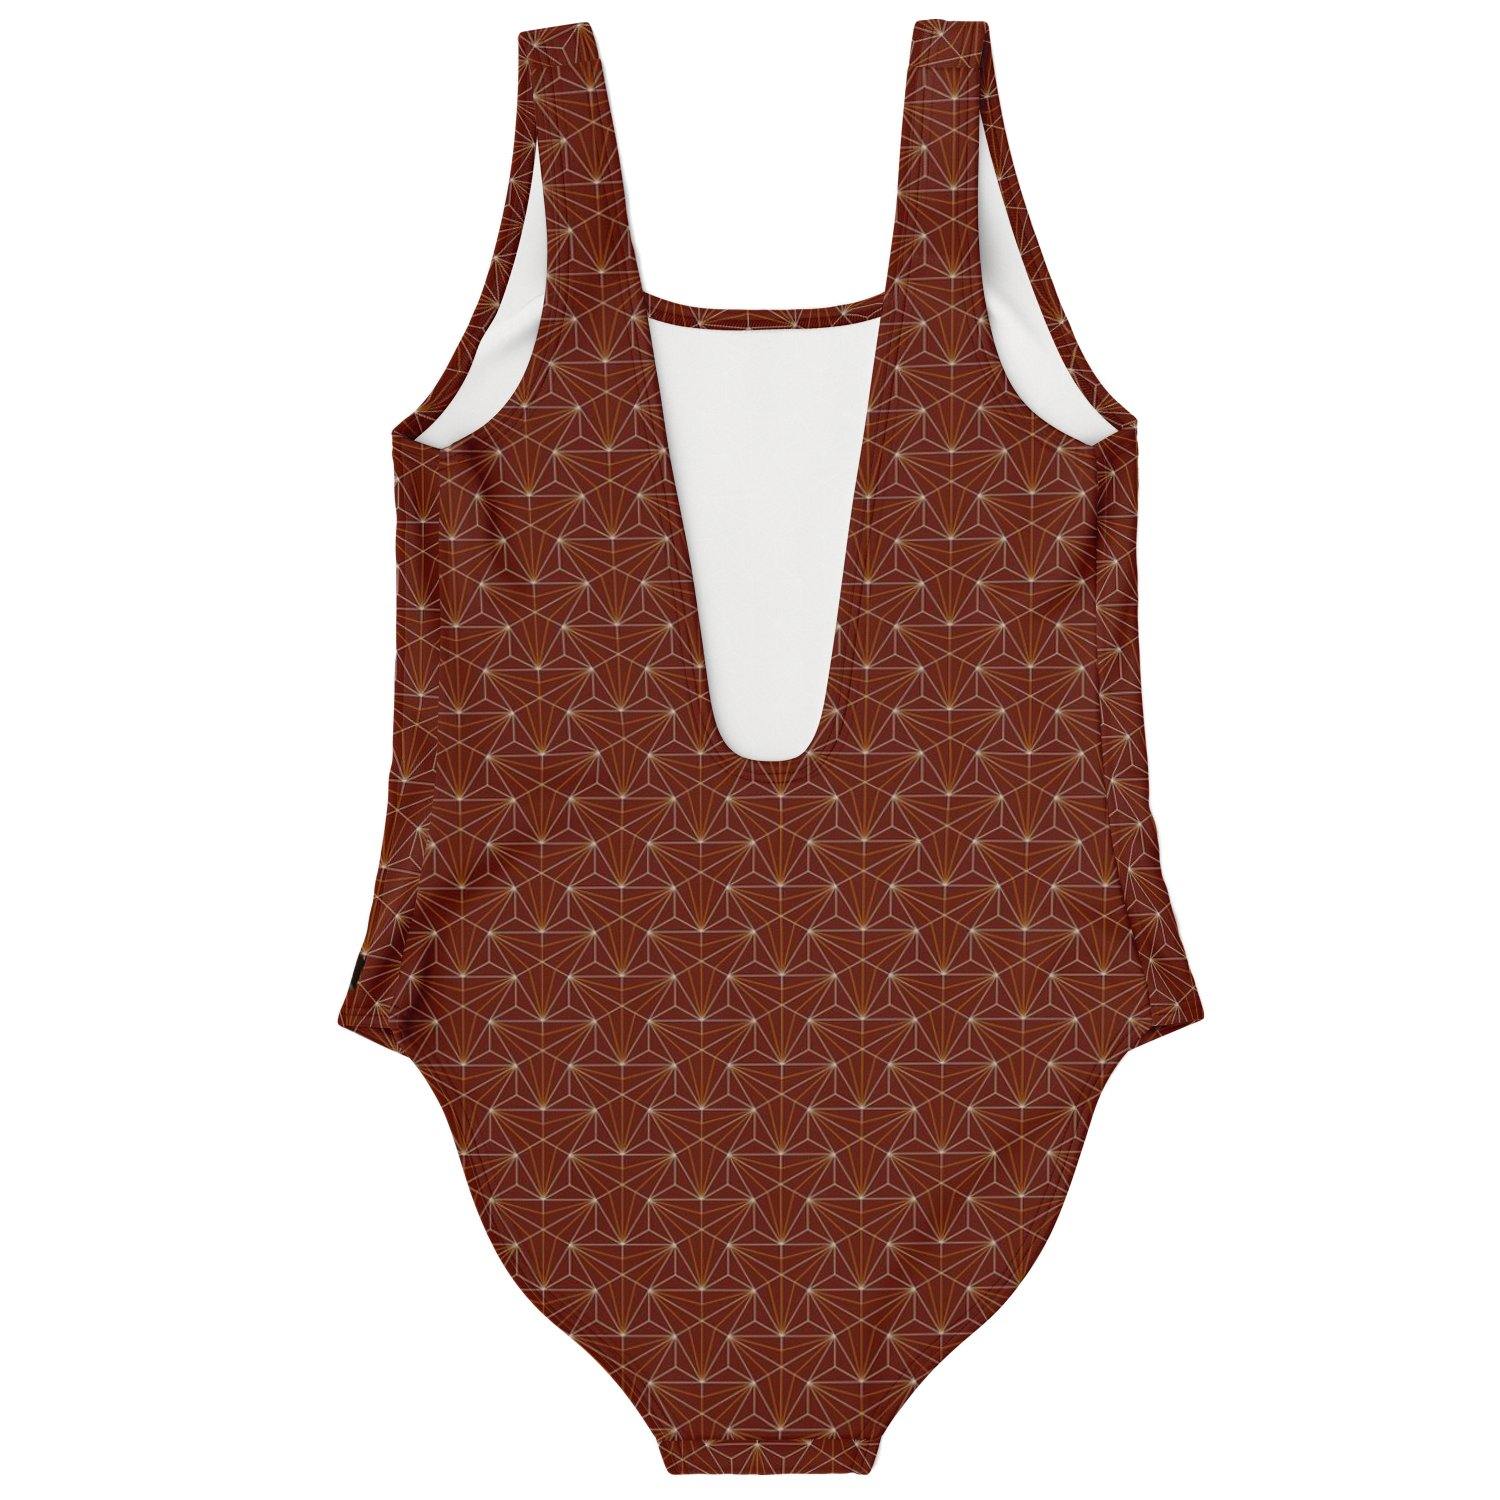 Terra Cotta Sacred Connections One Piece Swimsuit - Manifestie